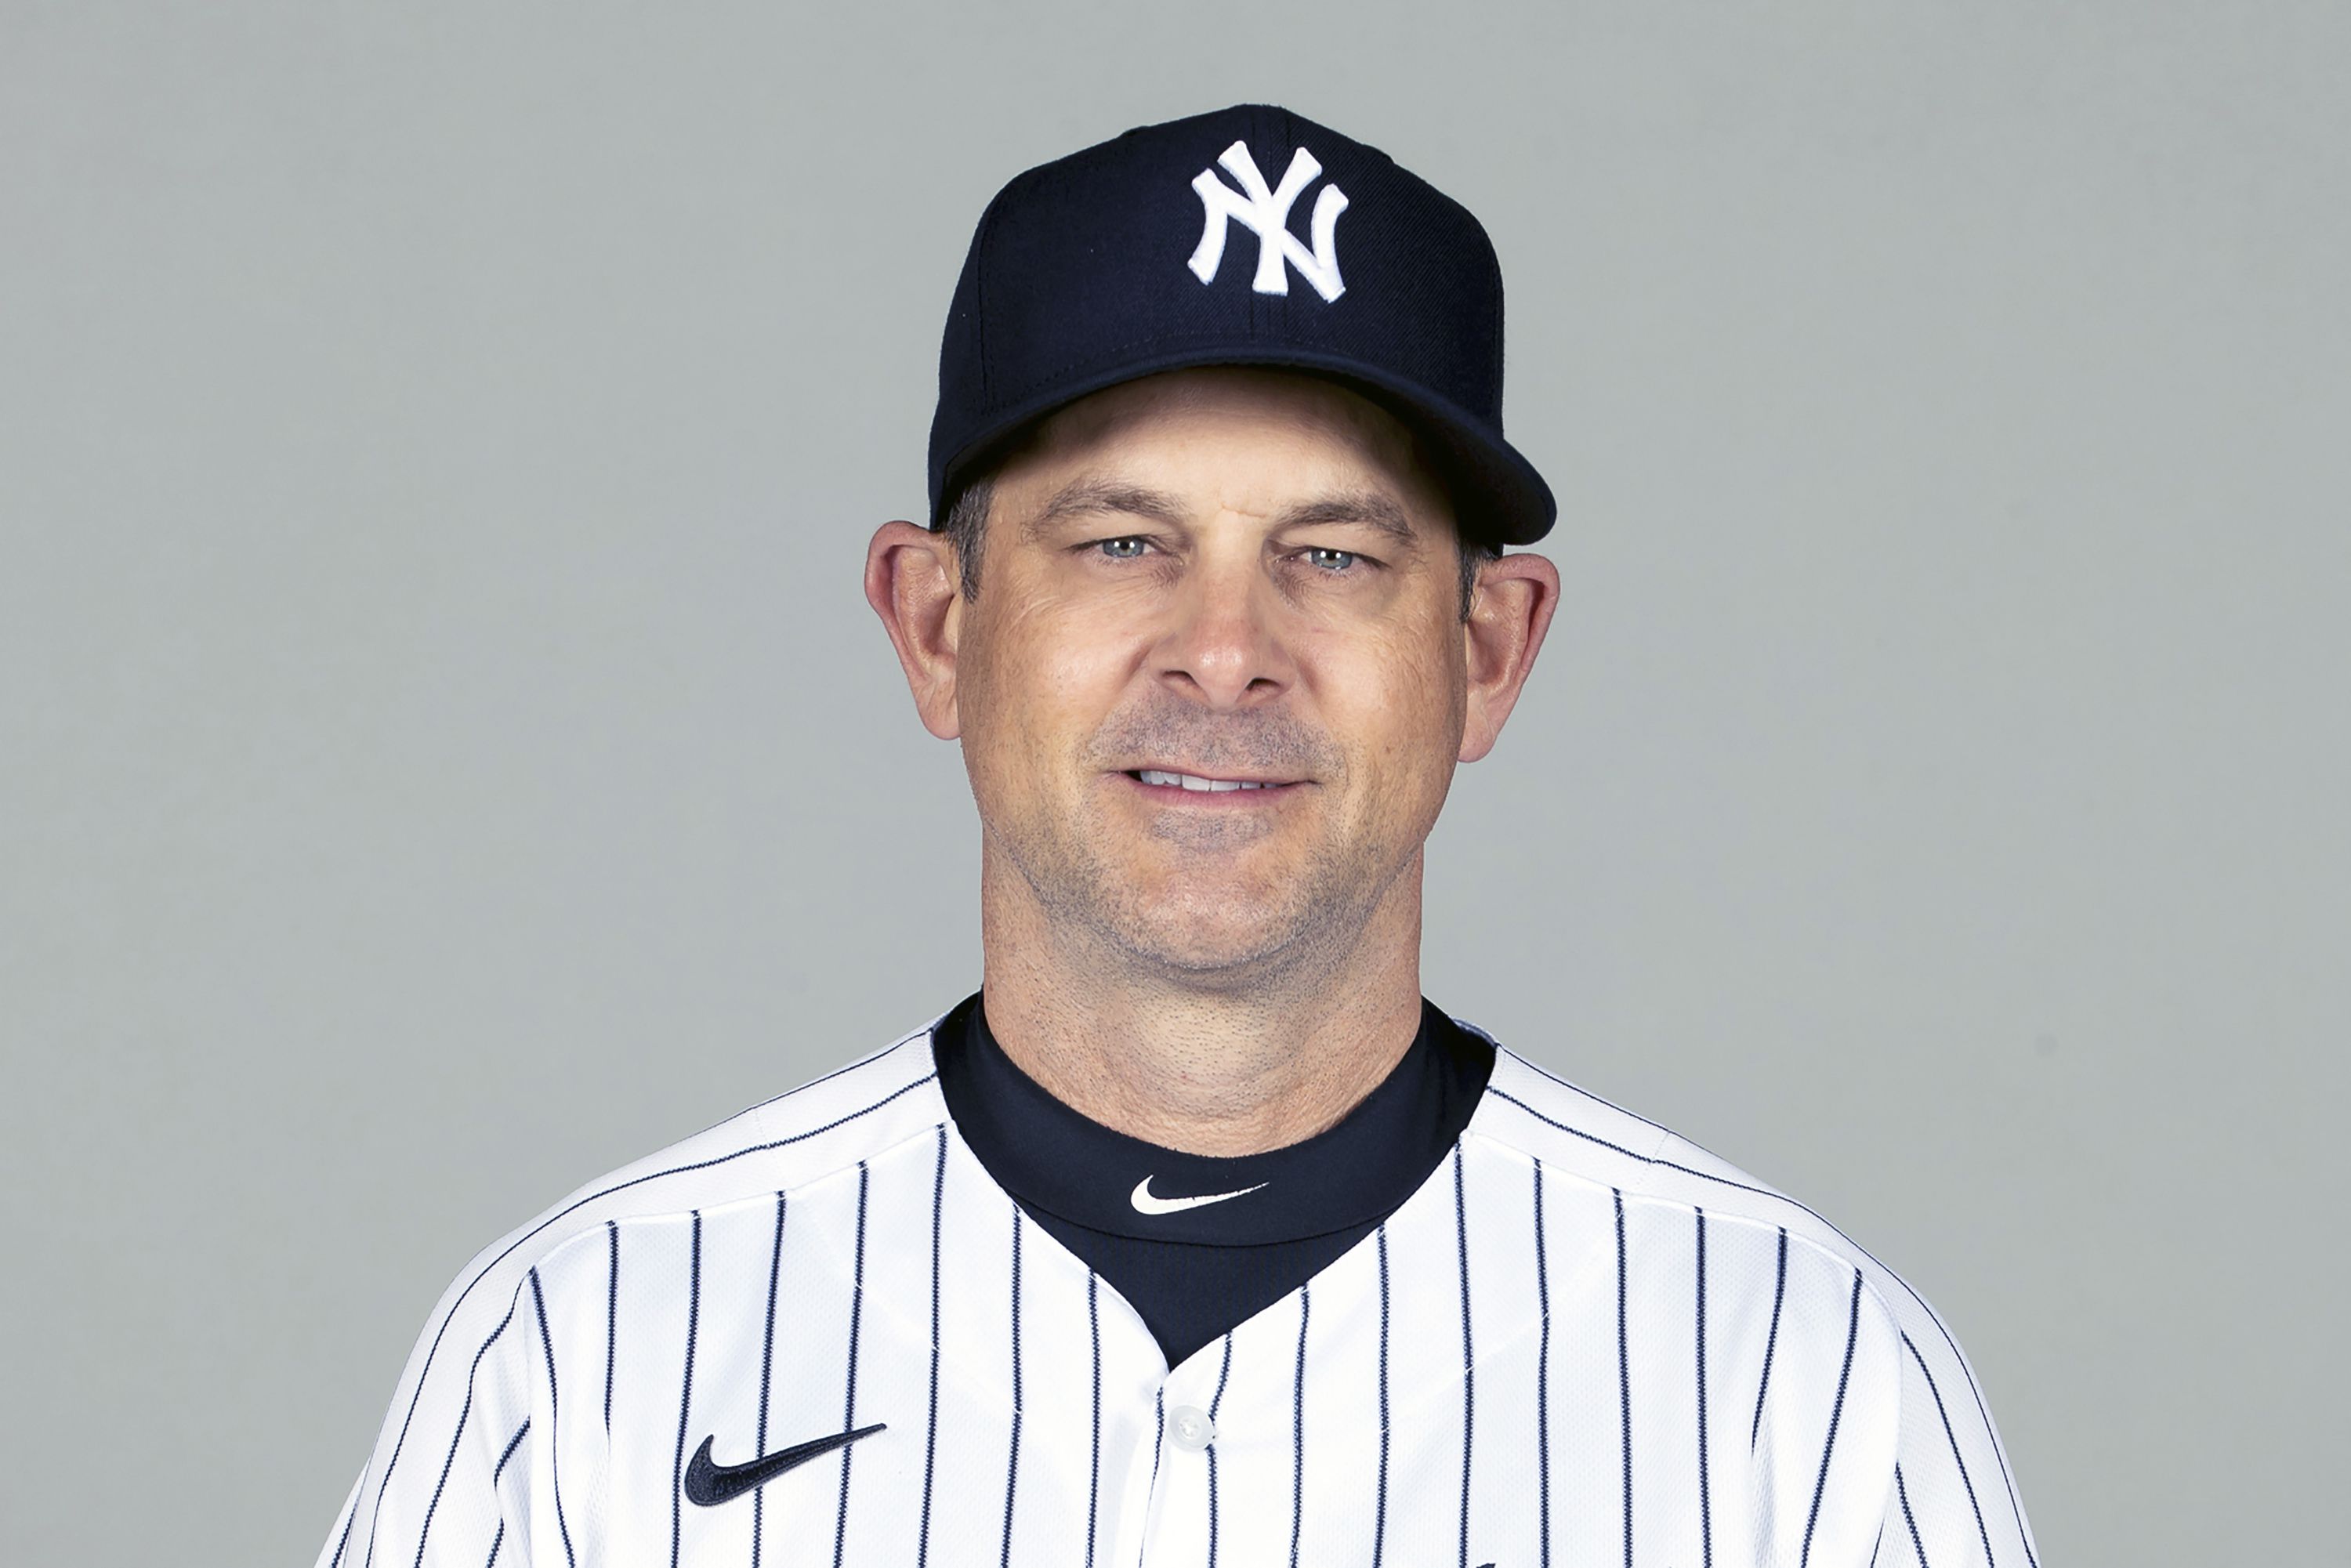 Yankees' Aaron Boone released from hospital after pacemaker